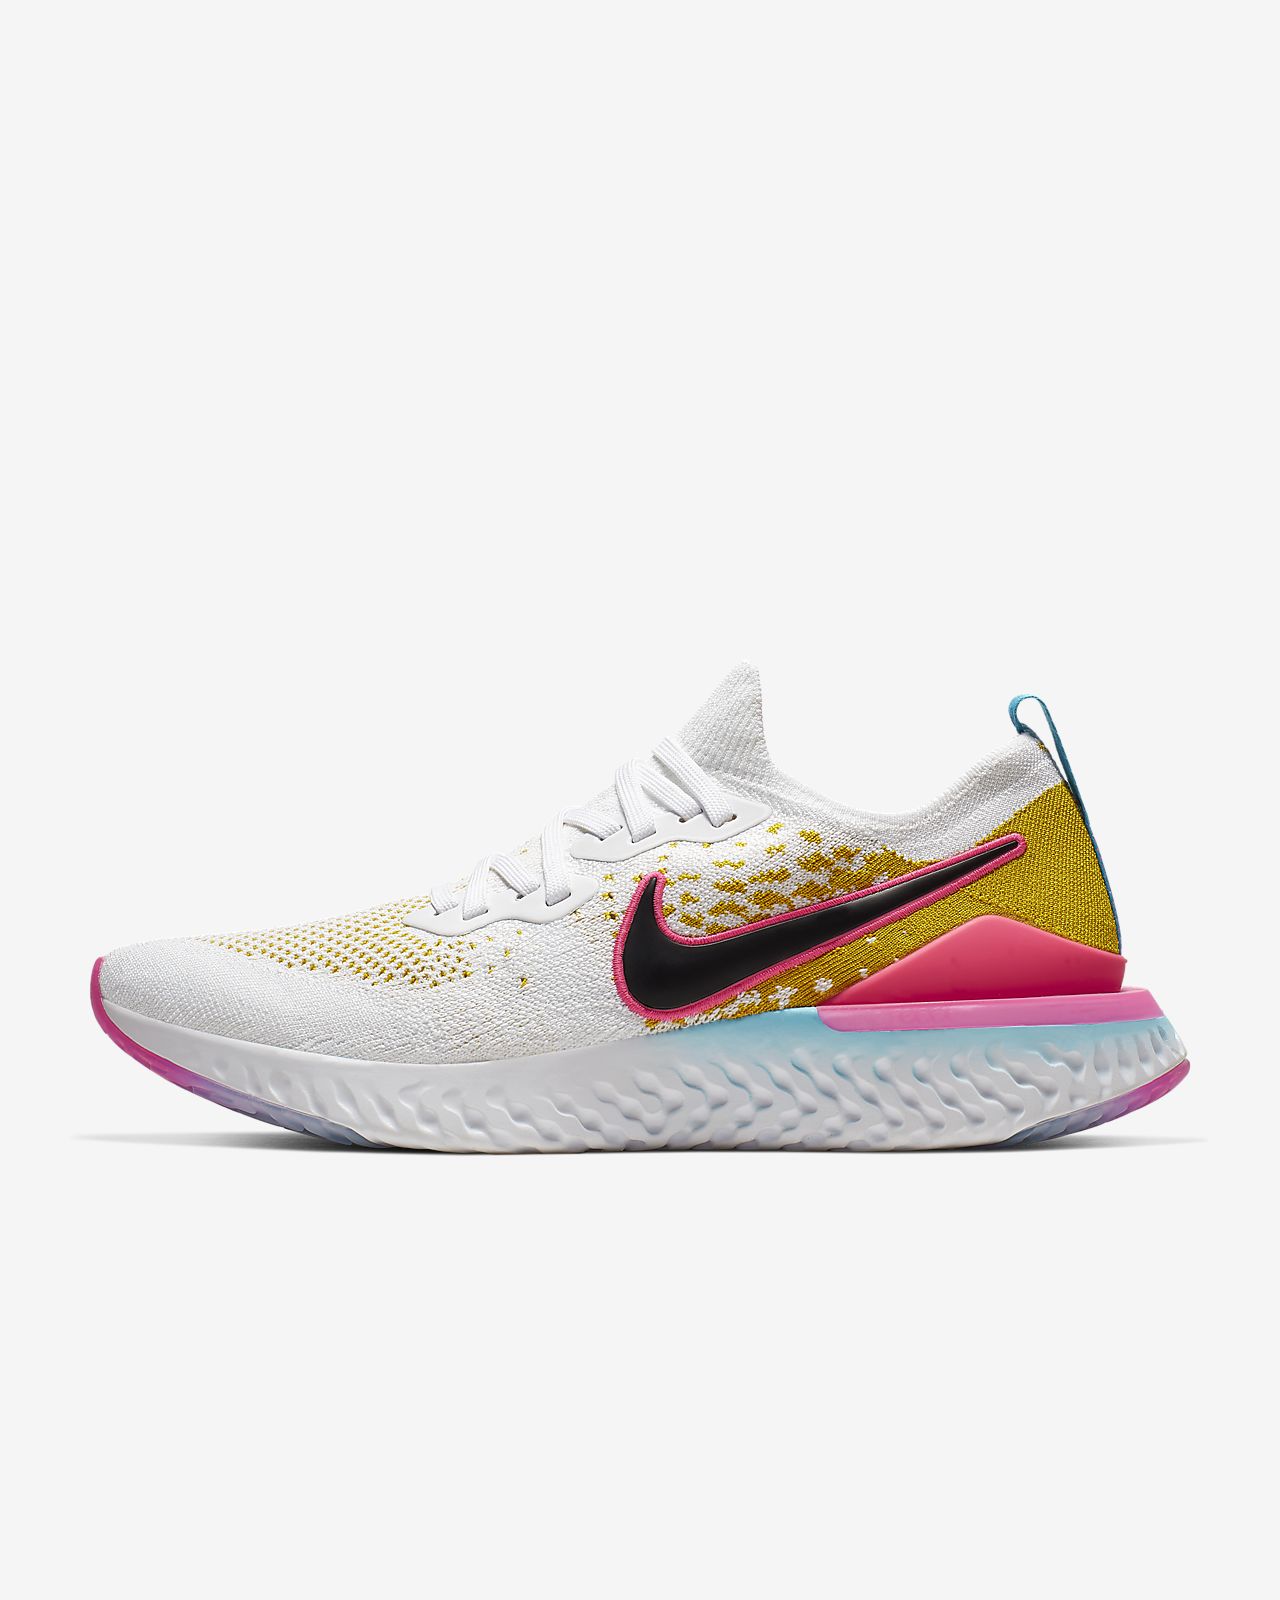 nike running epic react flyknit trainers in blue and pink